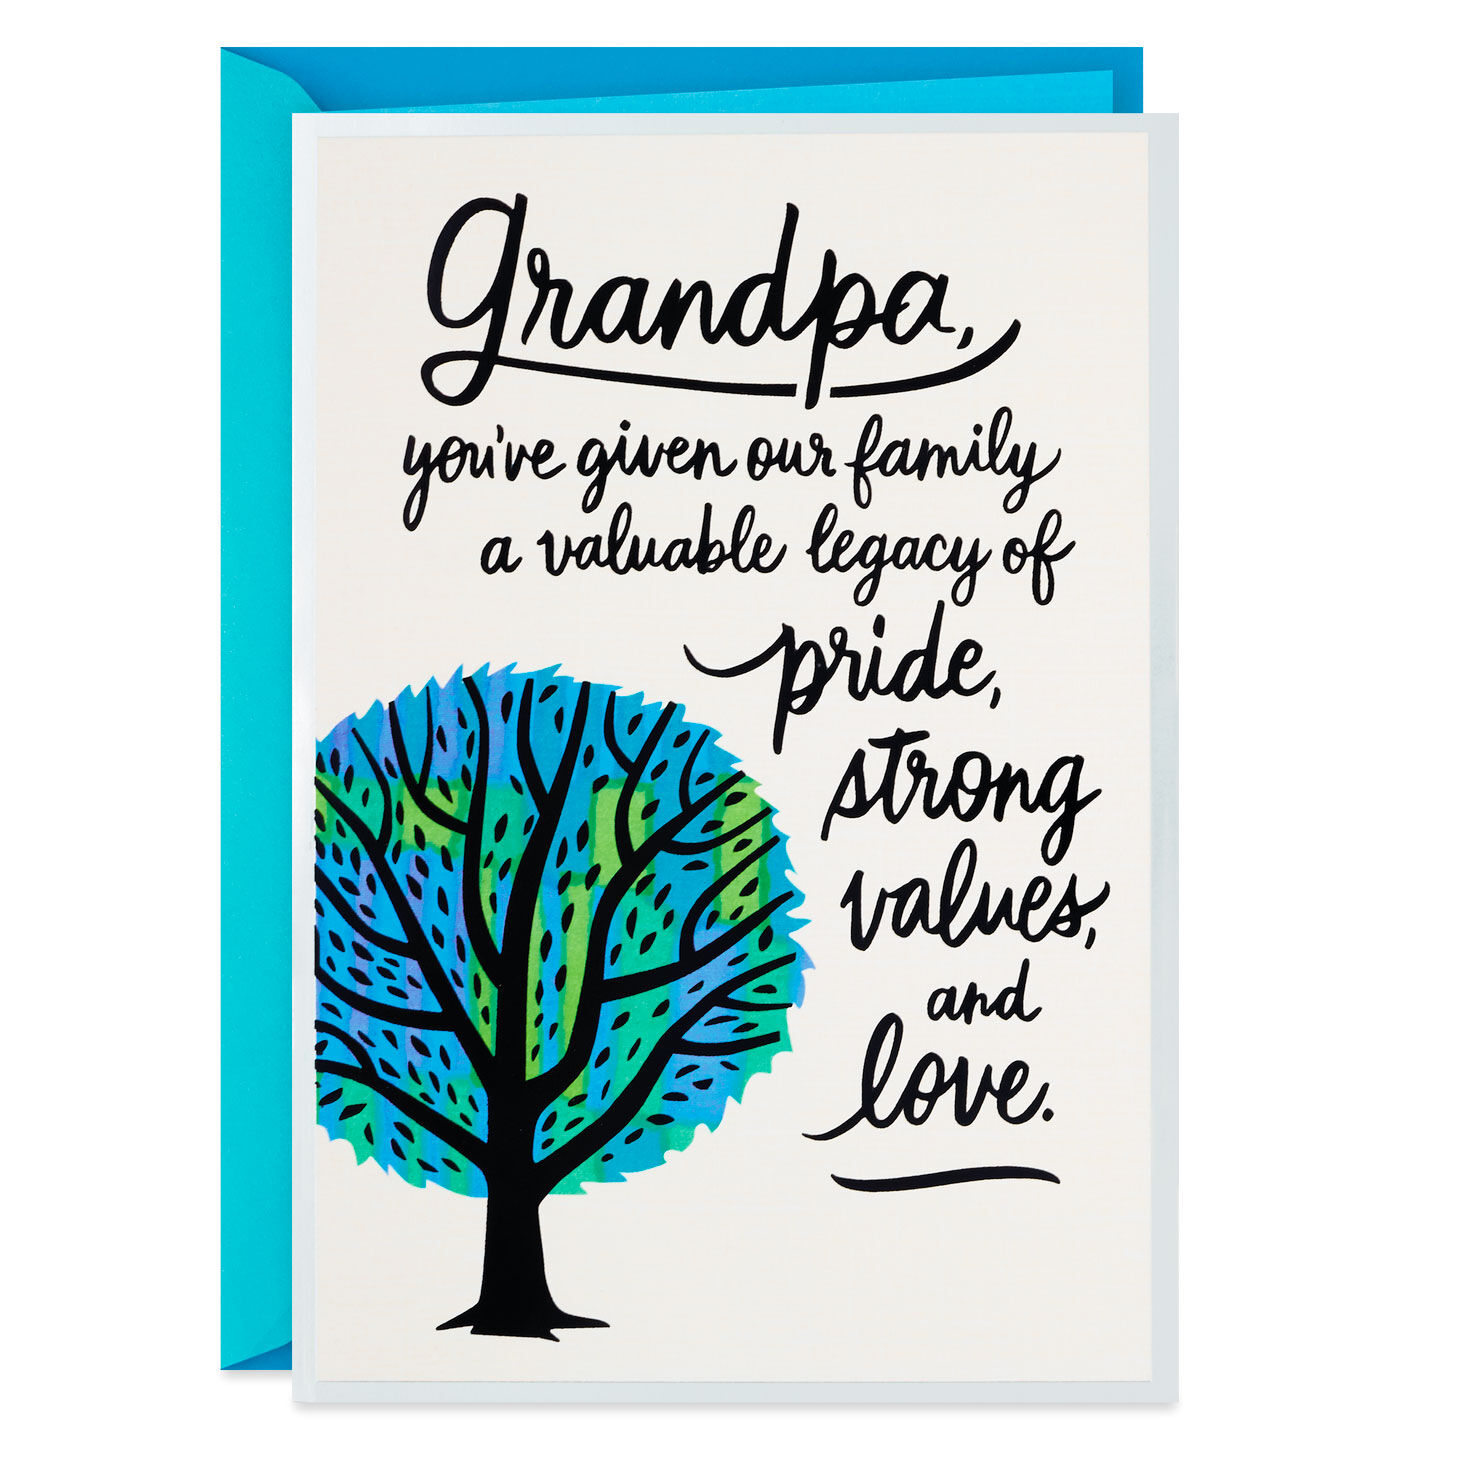 Pride, Values and Love Birthday Card for Grandpa for only USD 2.99 | Hallmark